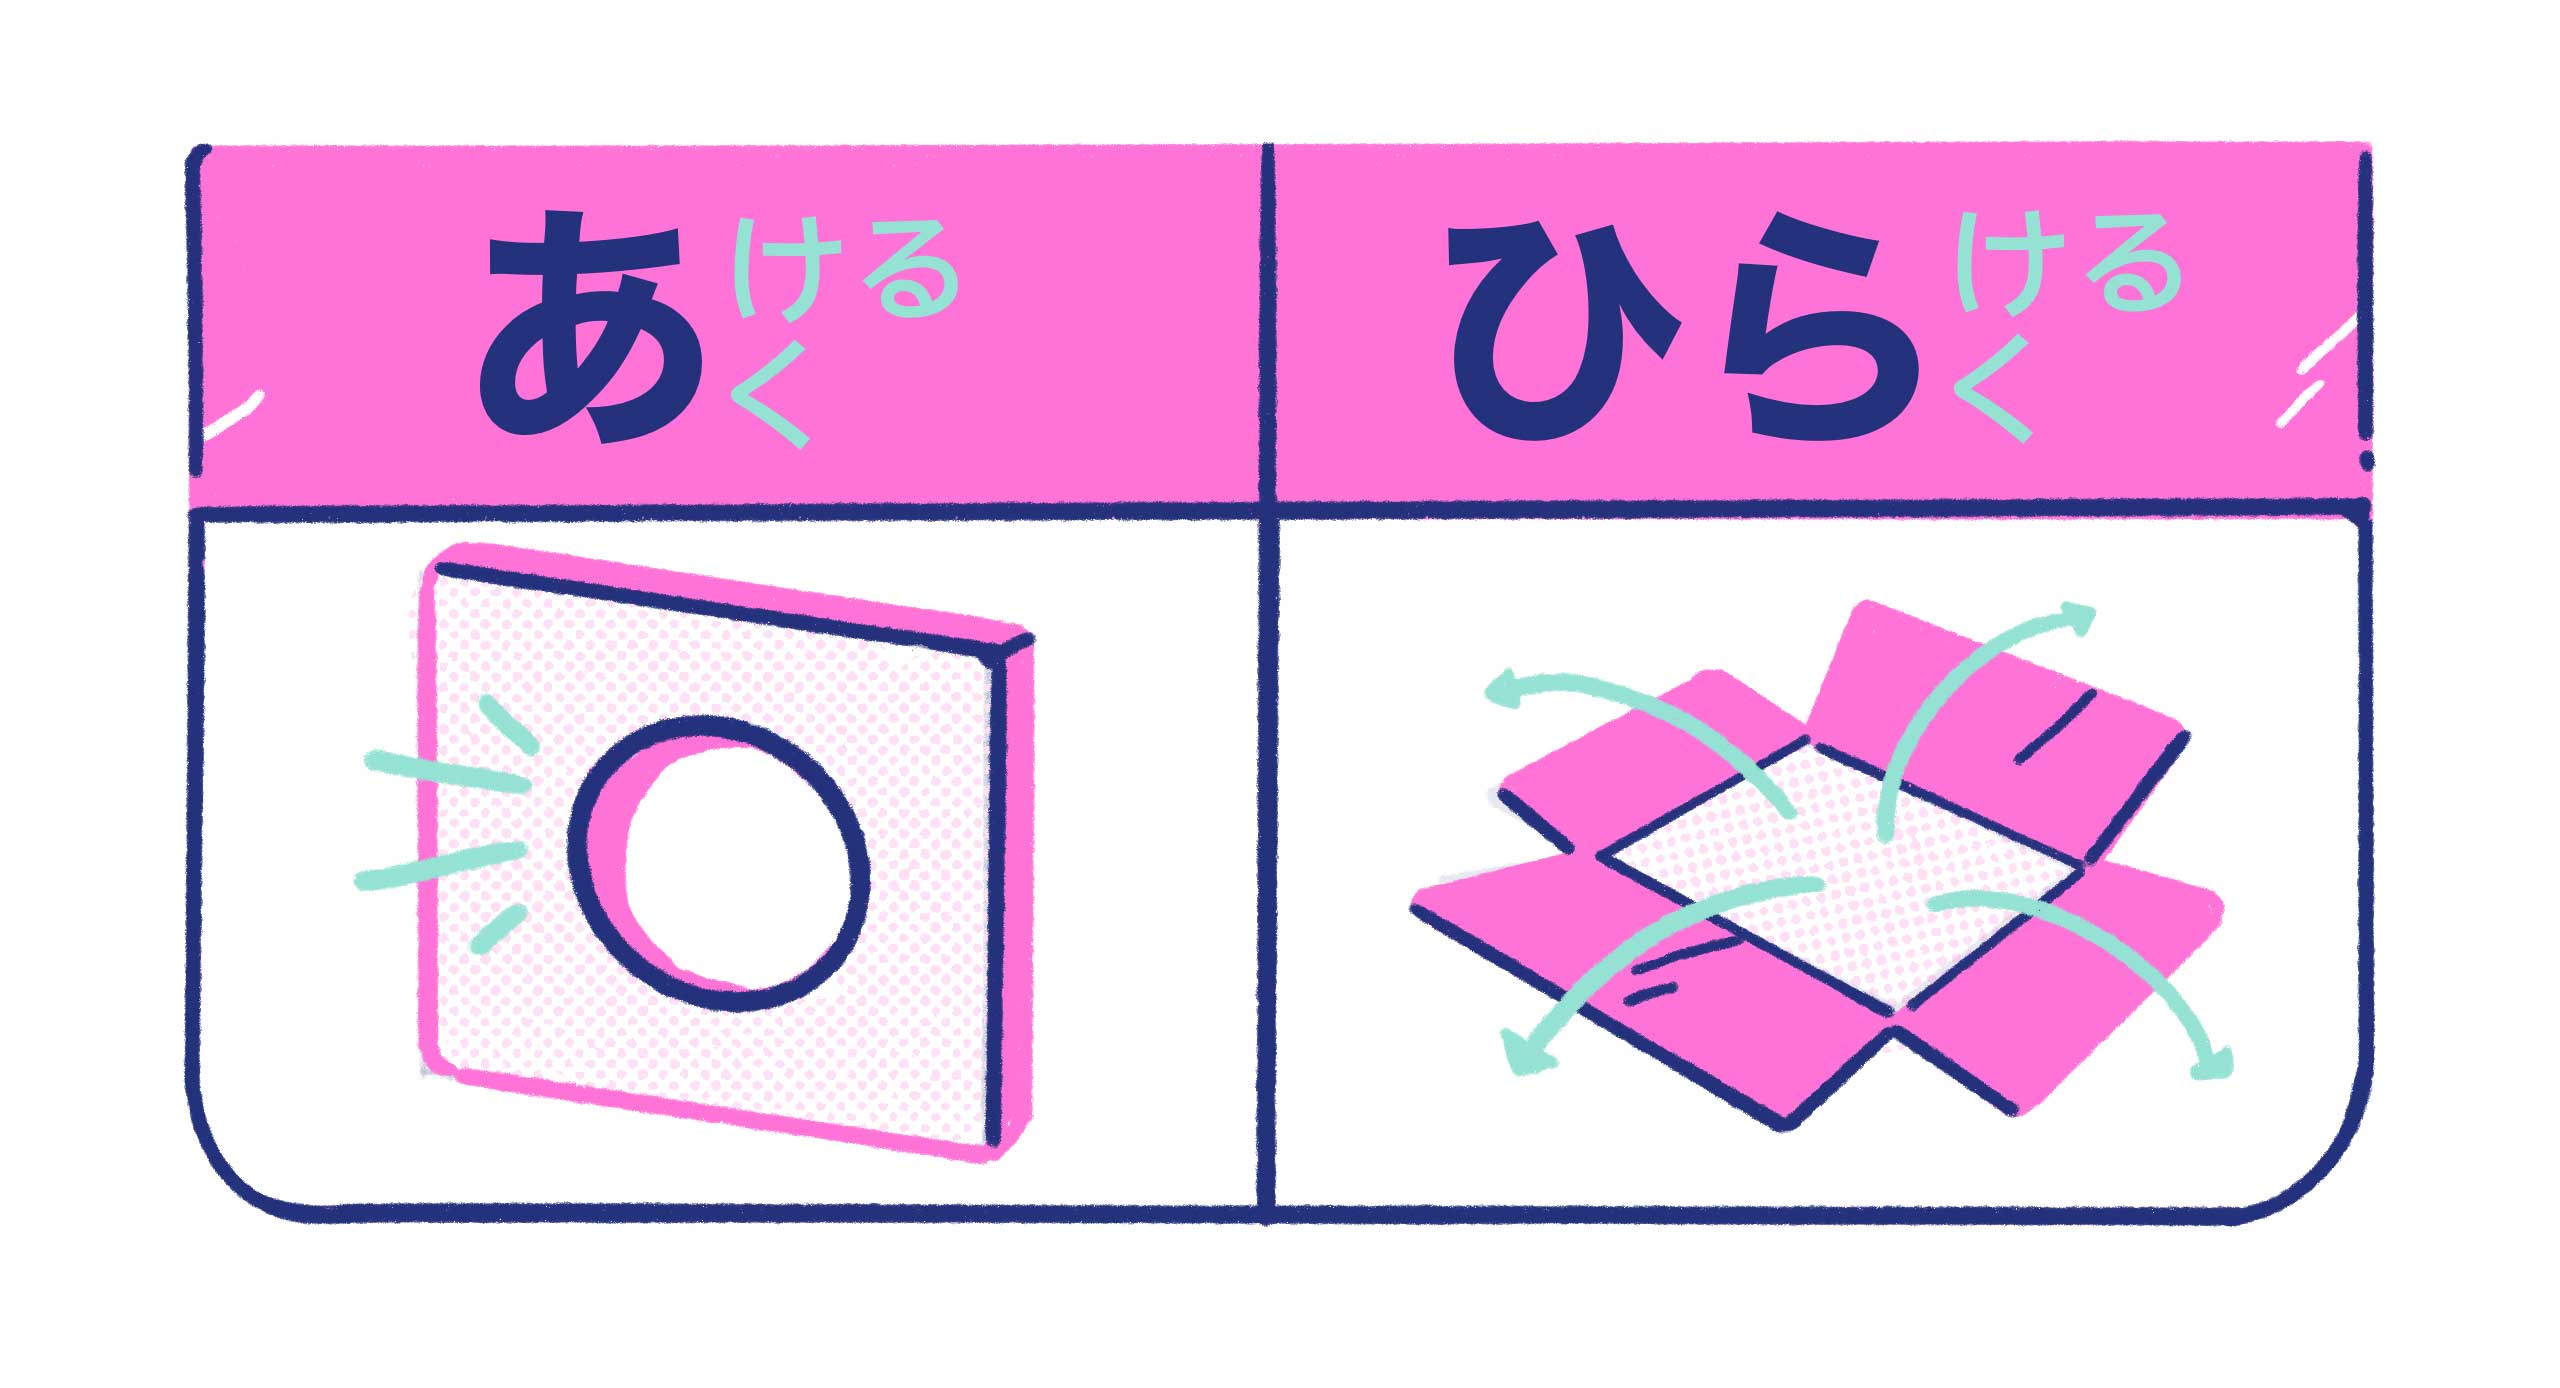 a wall with a hole for あける/あく and an opened box for ひらける/ひらく